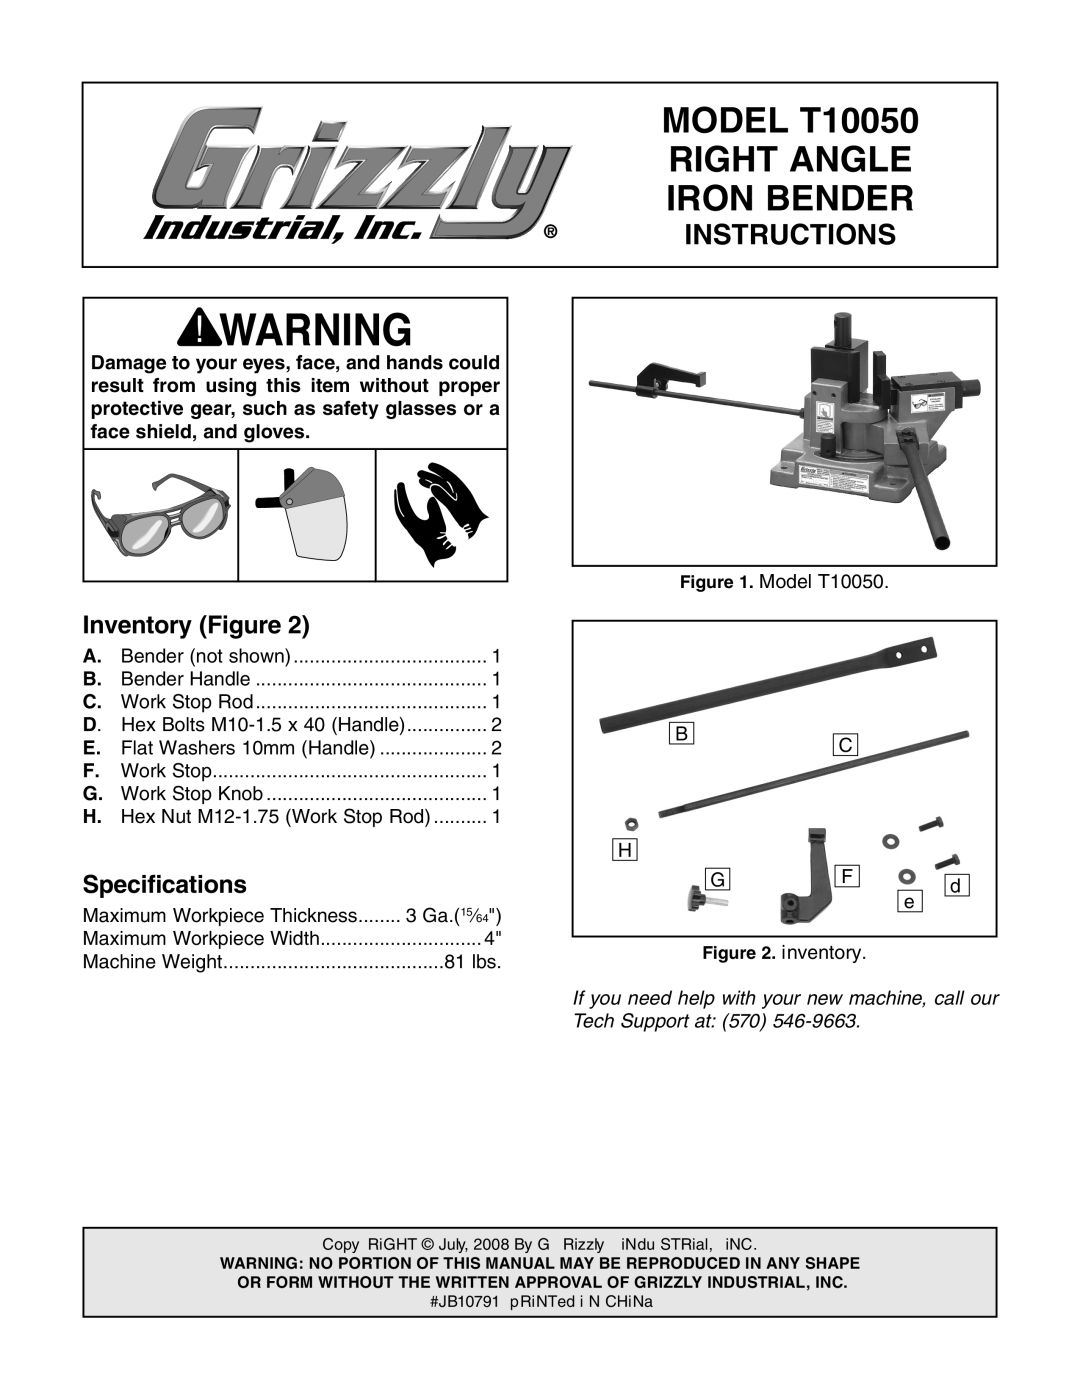 Grizzly specifications Inventory Figure, Specifications, MODEL T10050, Right Angle, Iron Bender, Instructions 